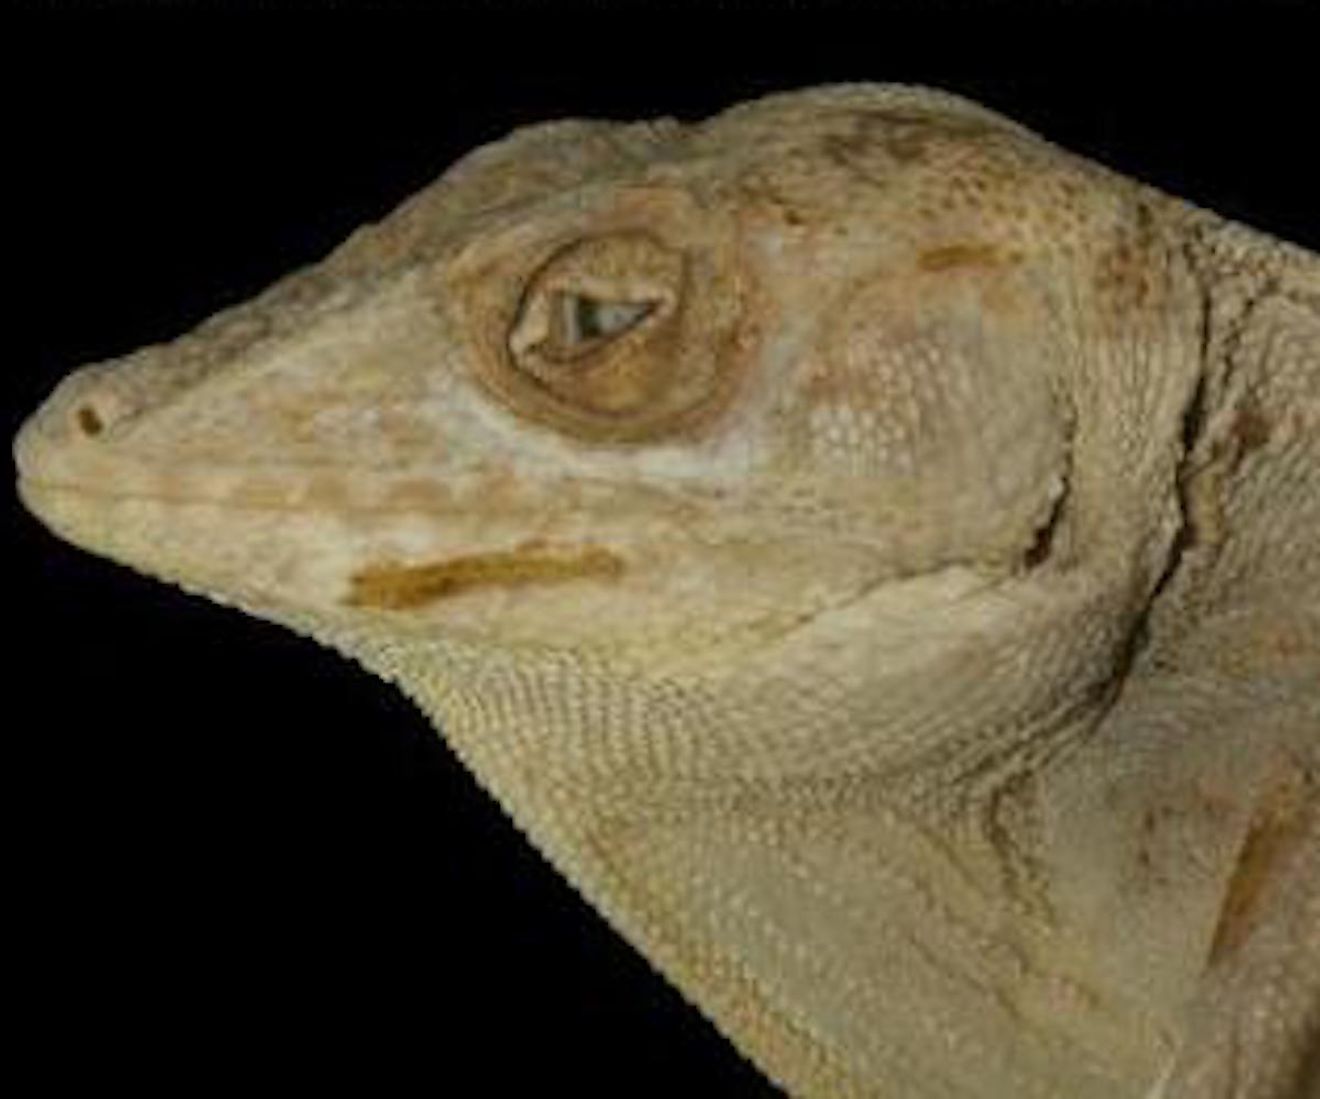 Giant anole from the island of Culebra. 